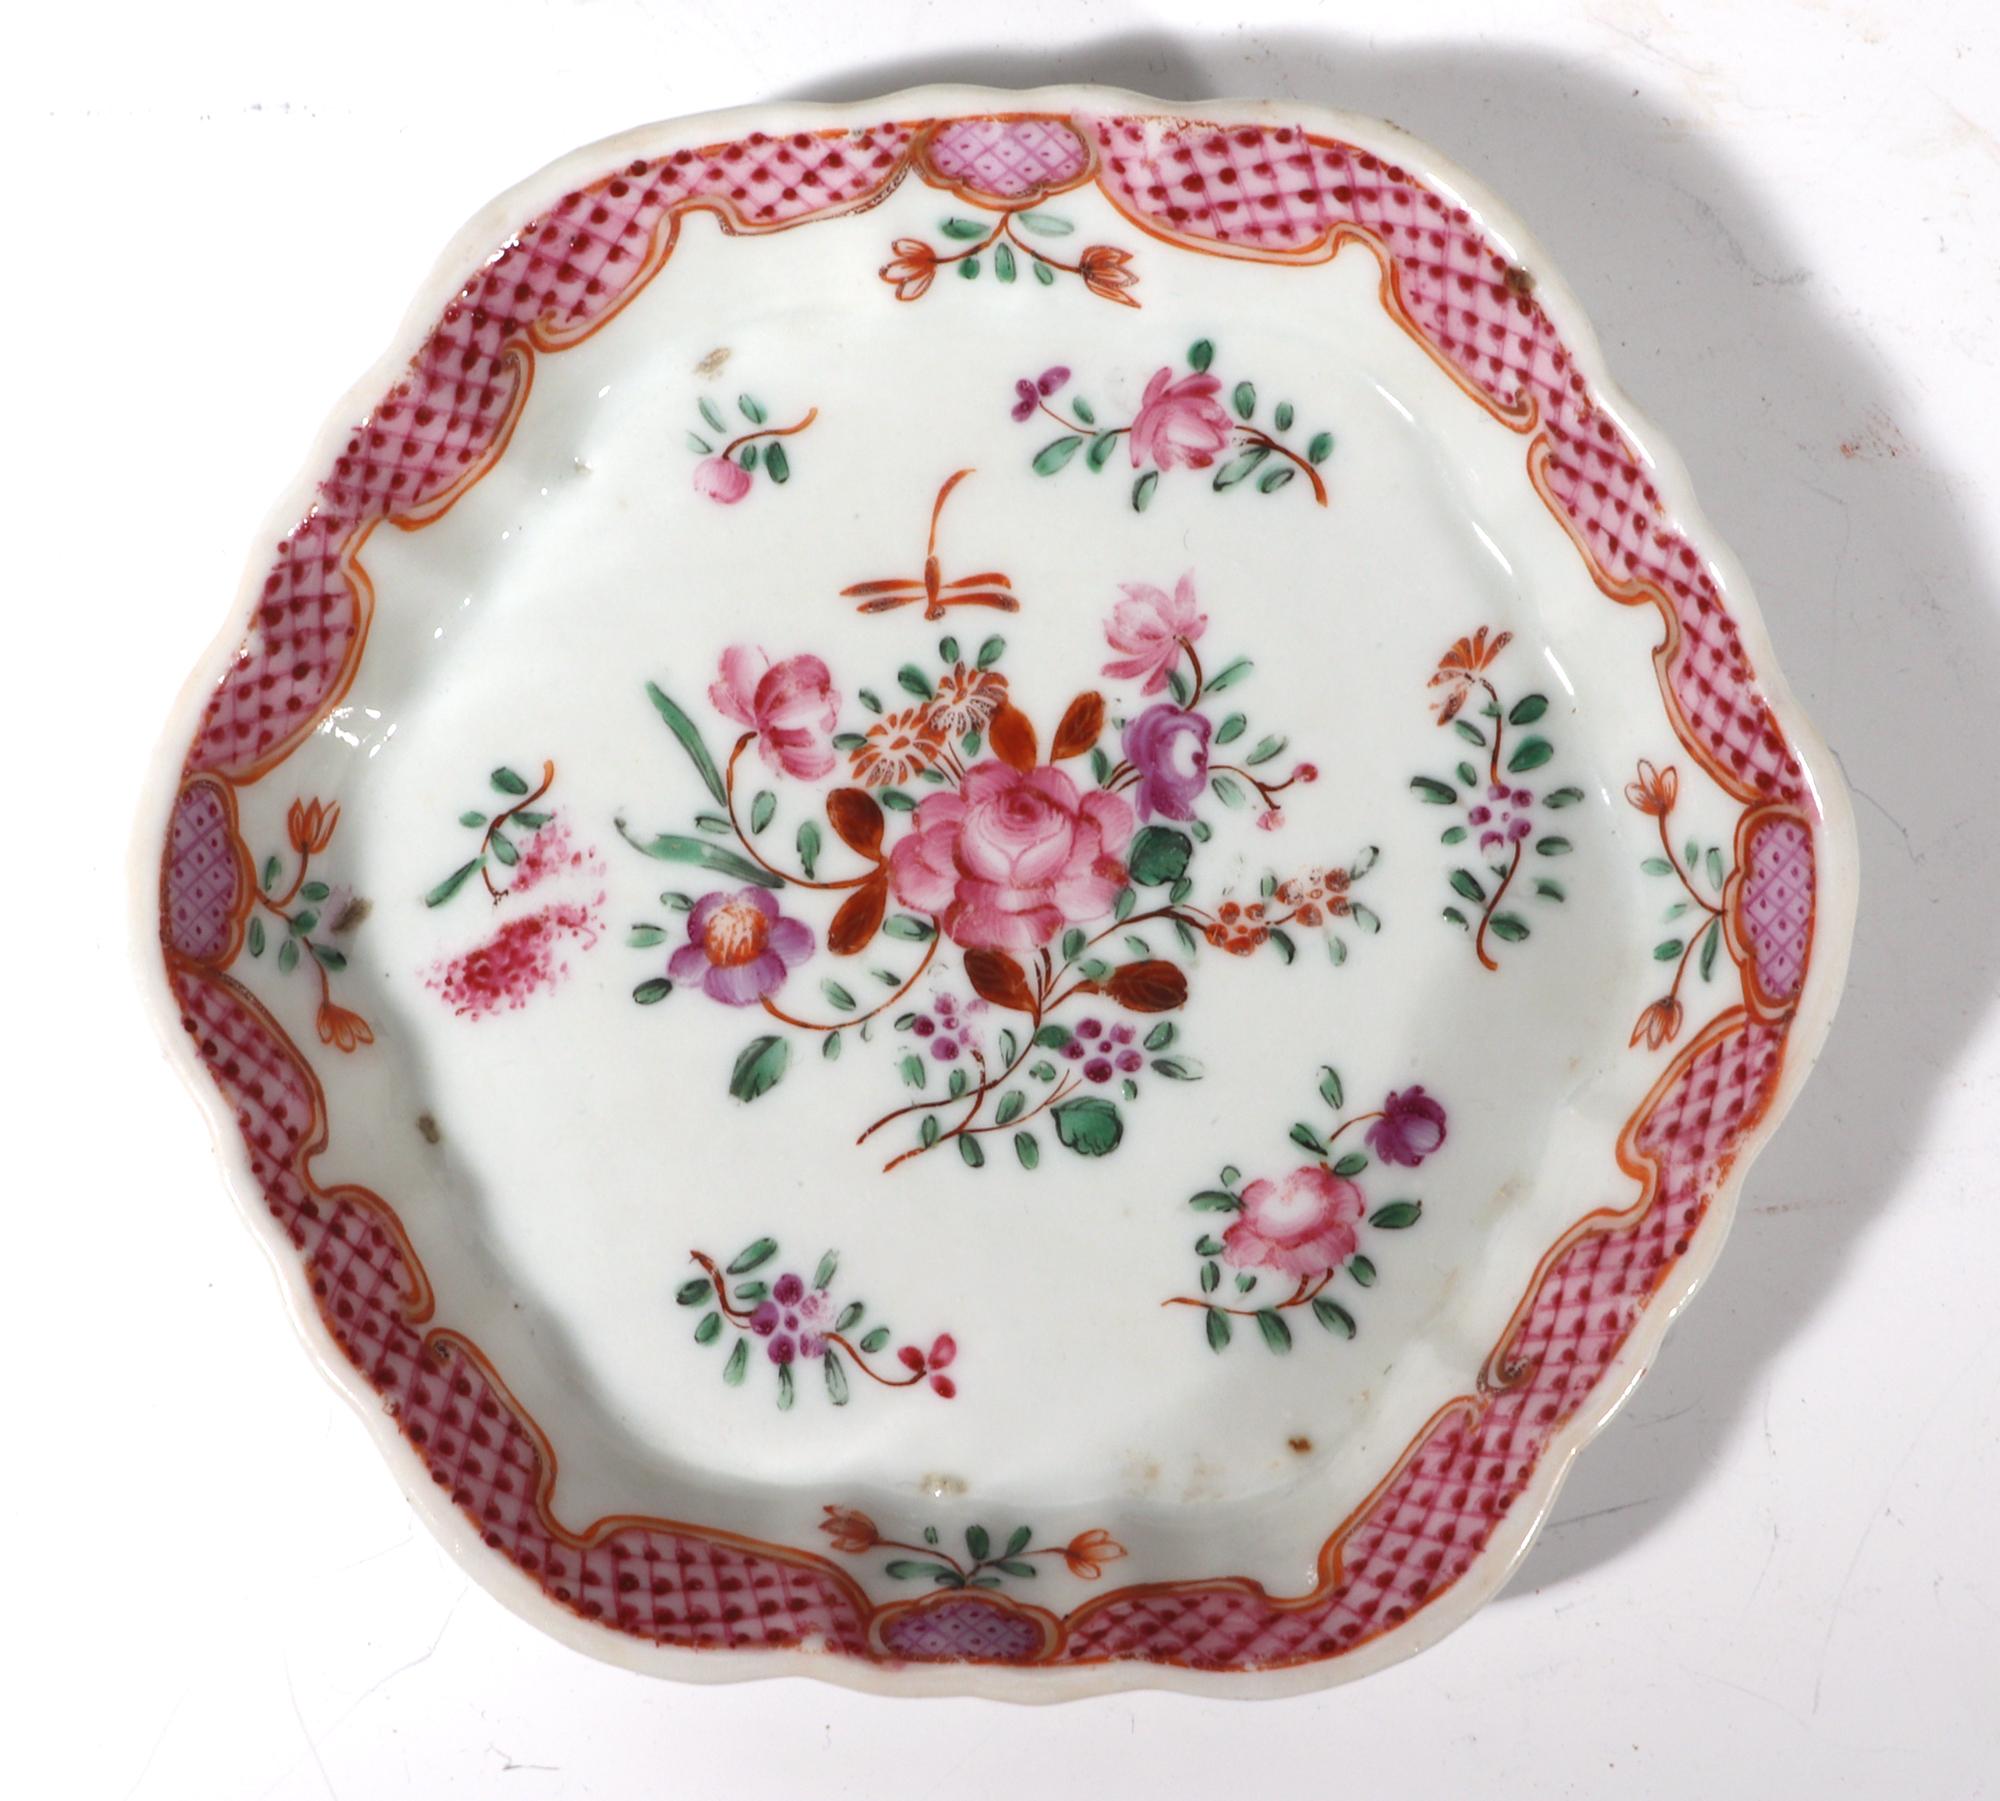 Chinese Export Porcelain Famille Rose Botanical teapot stand,
circa 1775

The Chinese Export porcelain famille rose hexagonal teapot stand is centered with a grouping of flowers and leaves with small flowering stems around the edge of the center